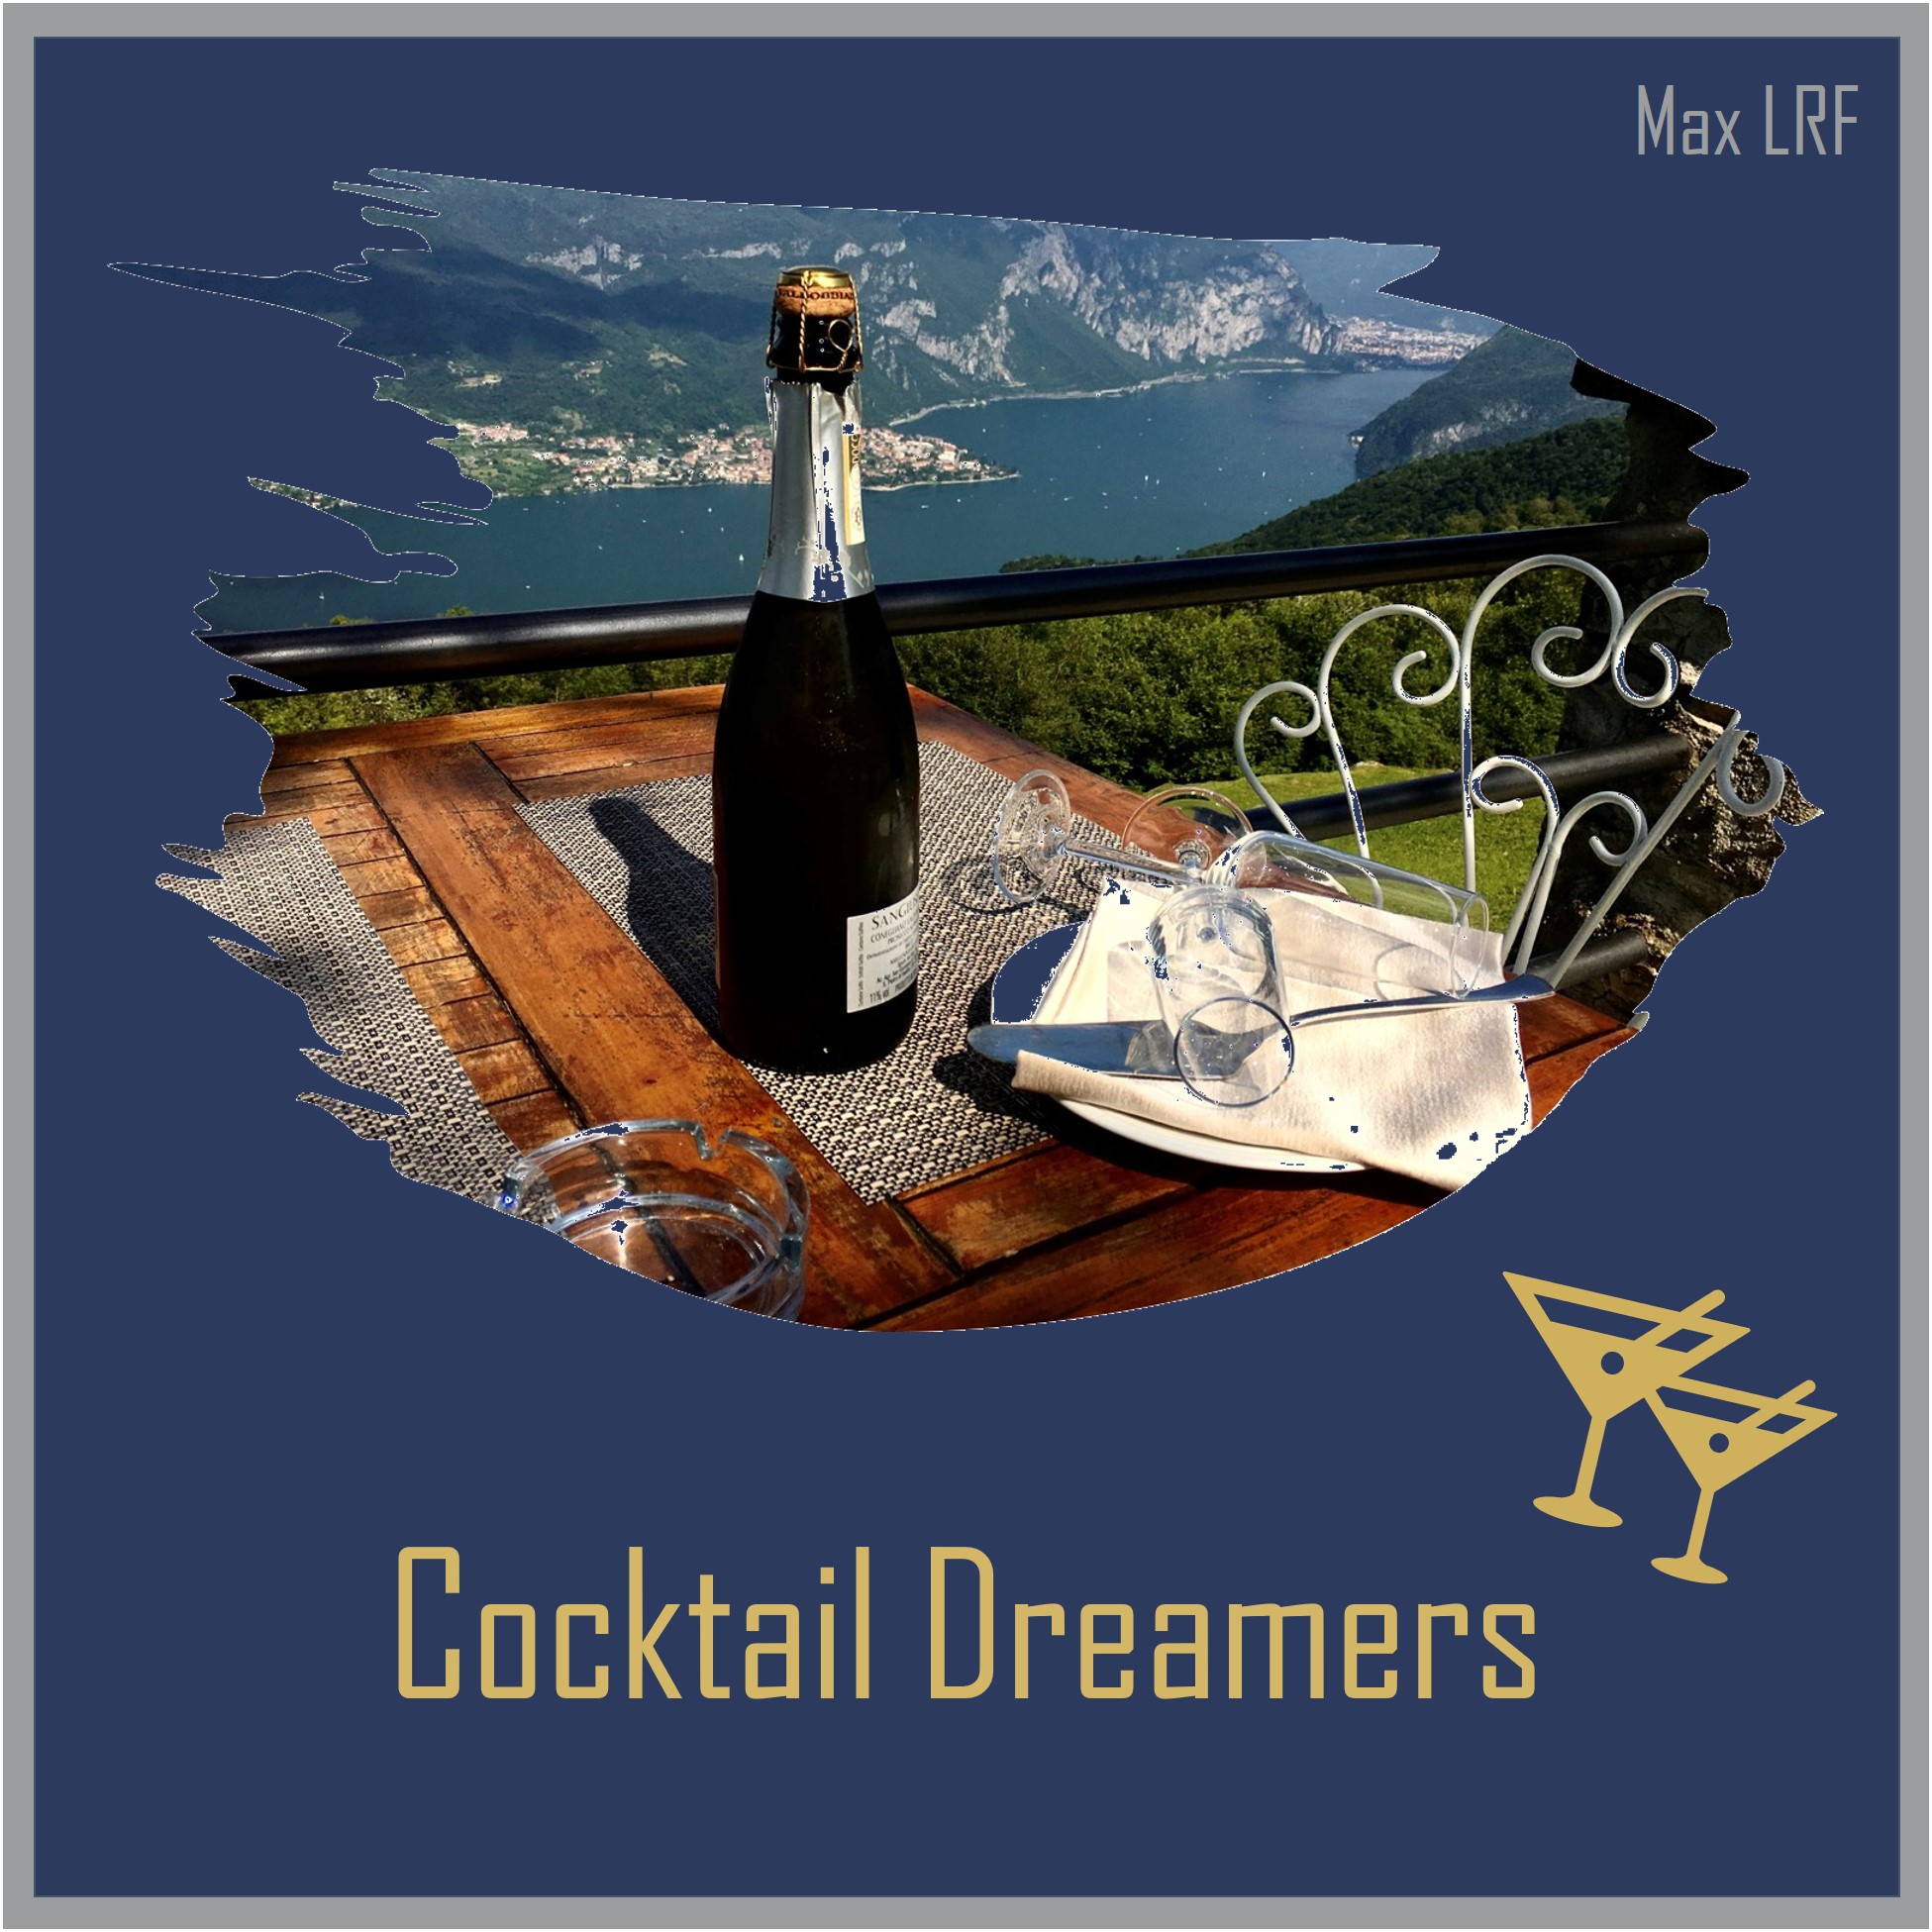 Max LRF - Cocktail Dreamers